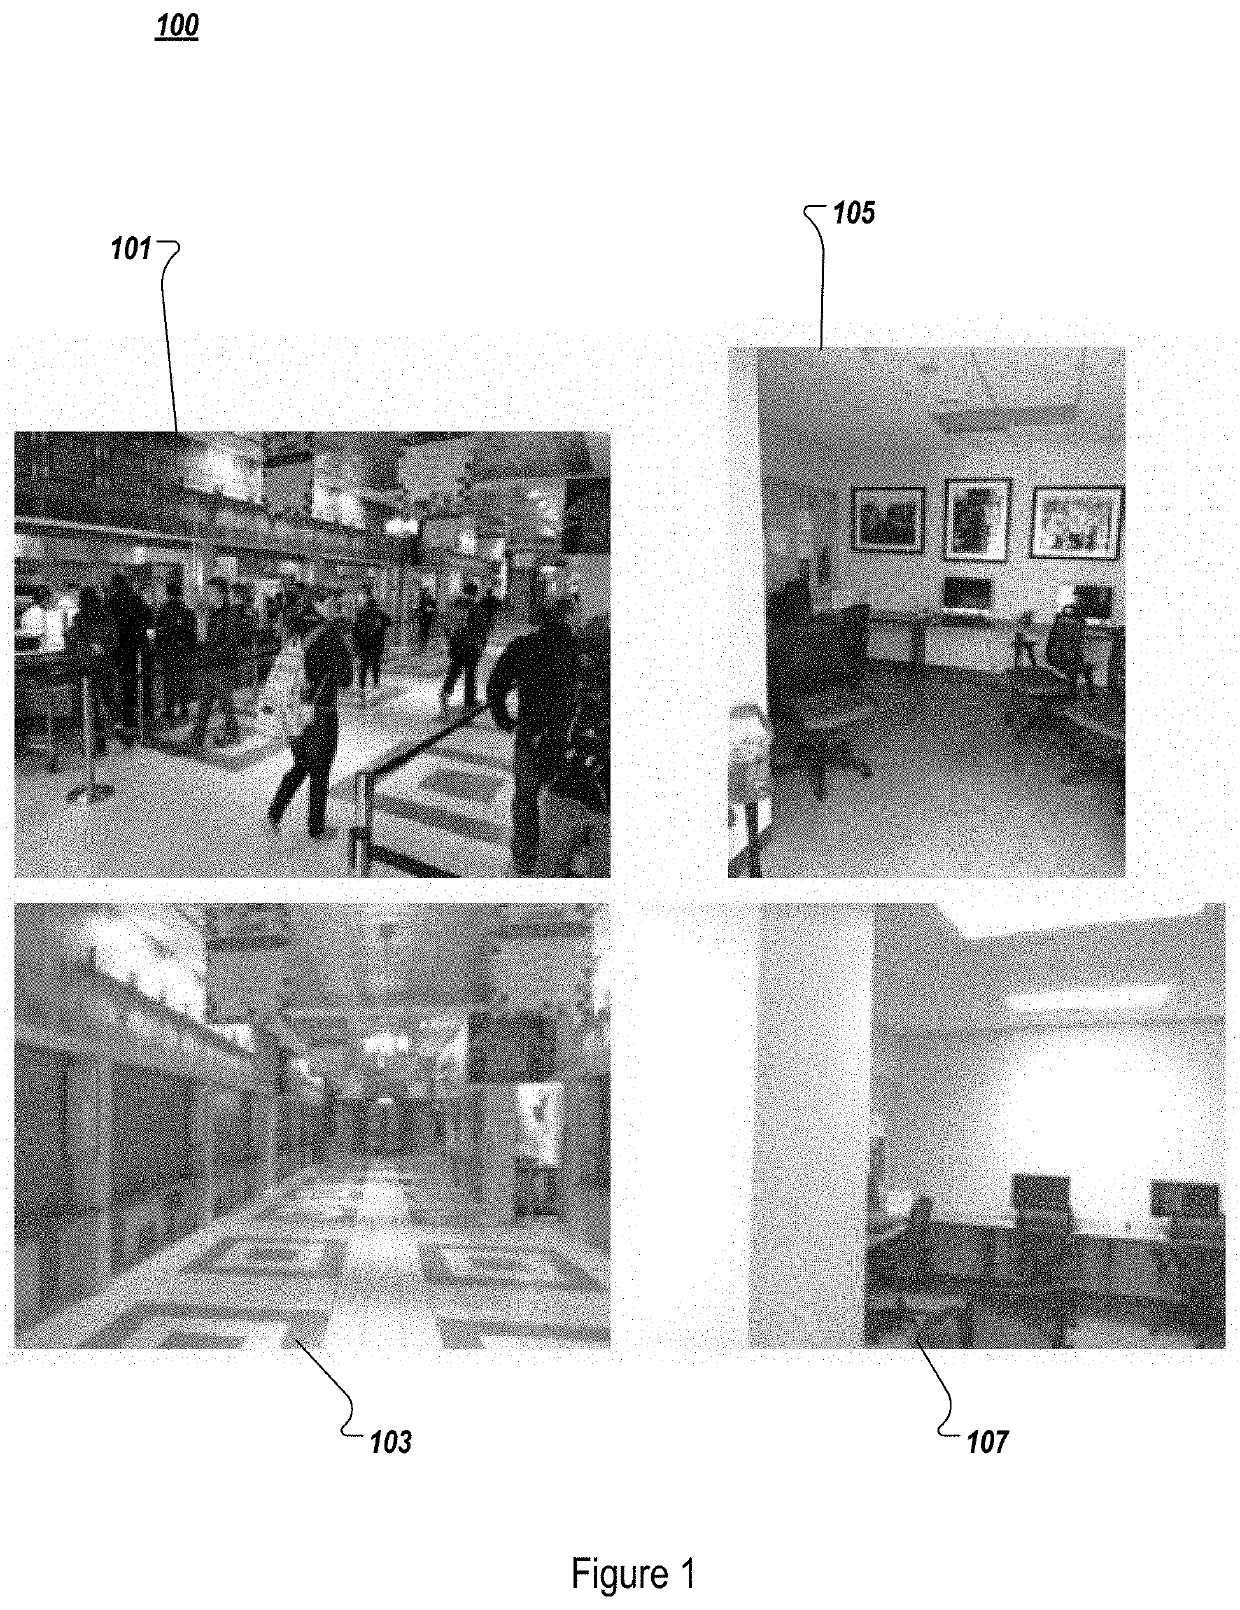 Indoor localization using real-time context fusion of visual information from static and dynamic cameras